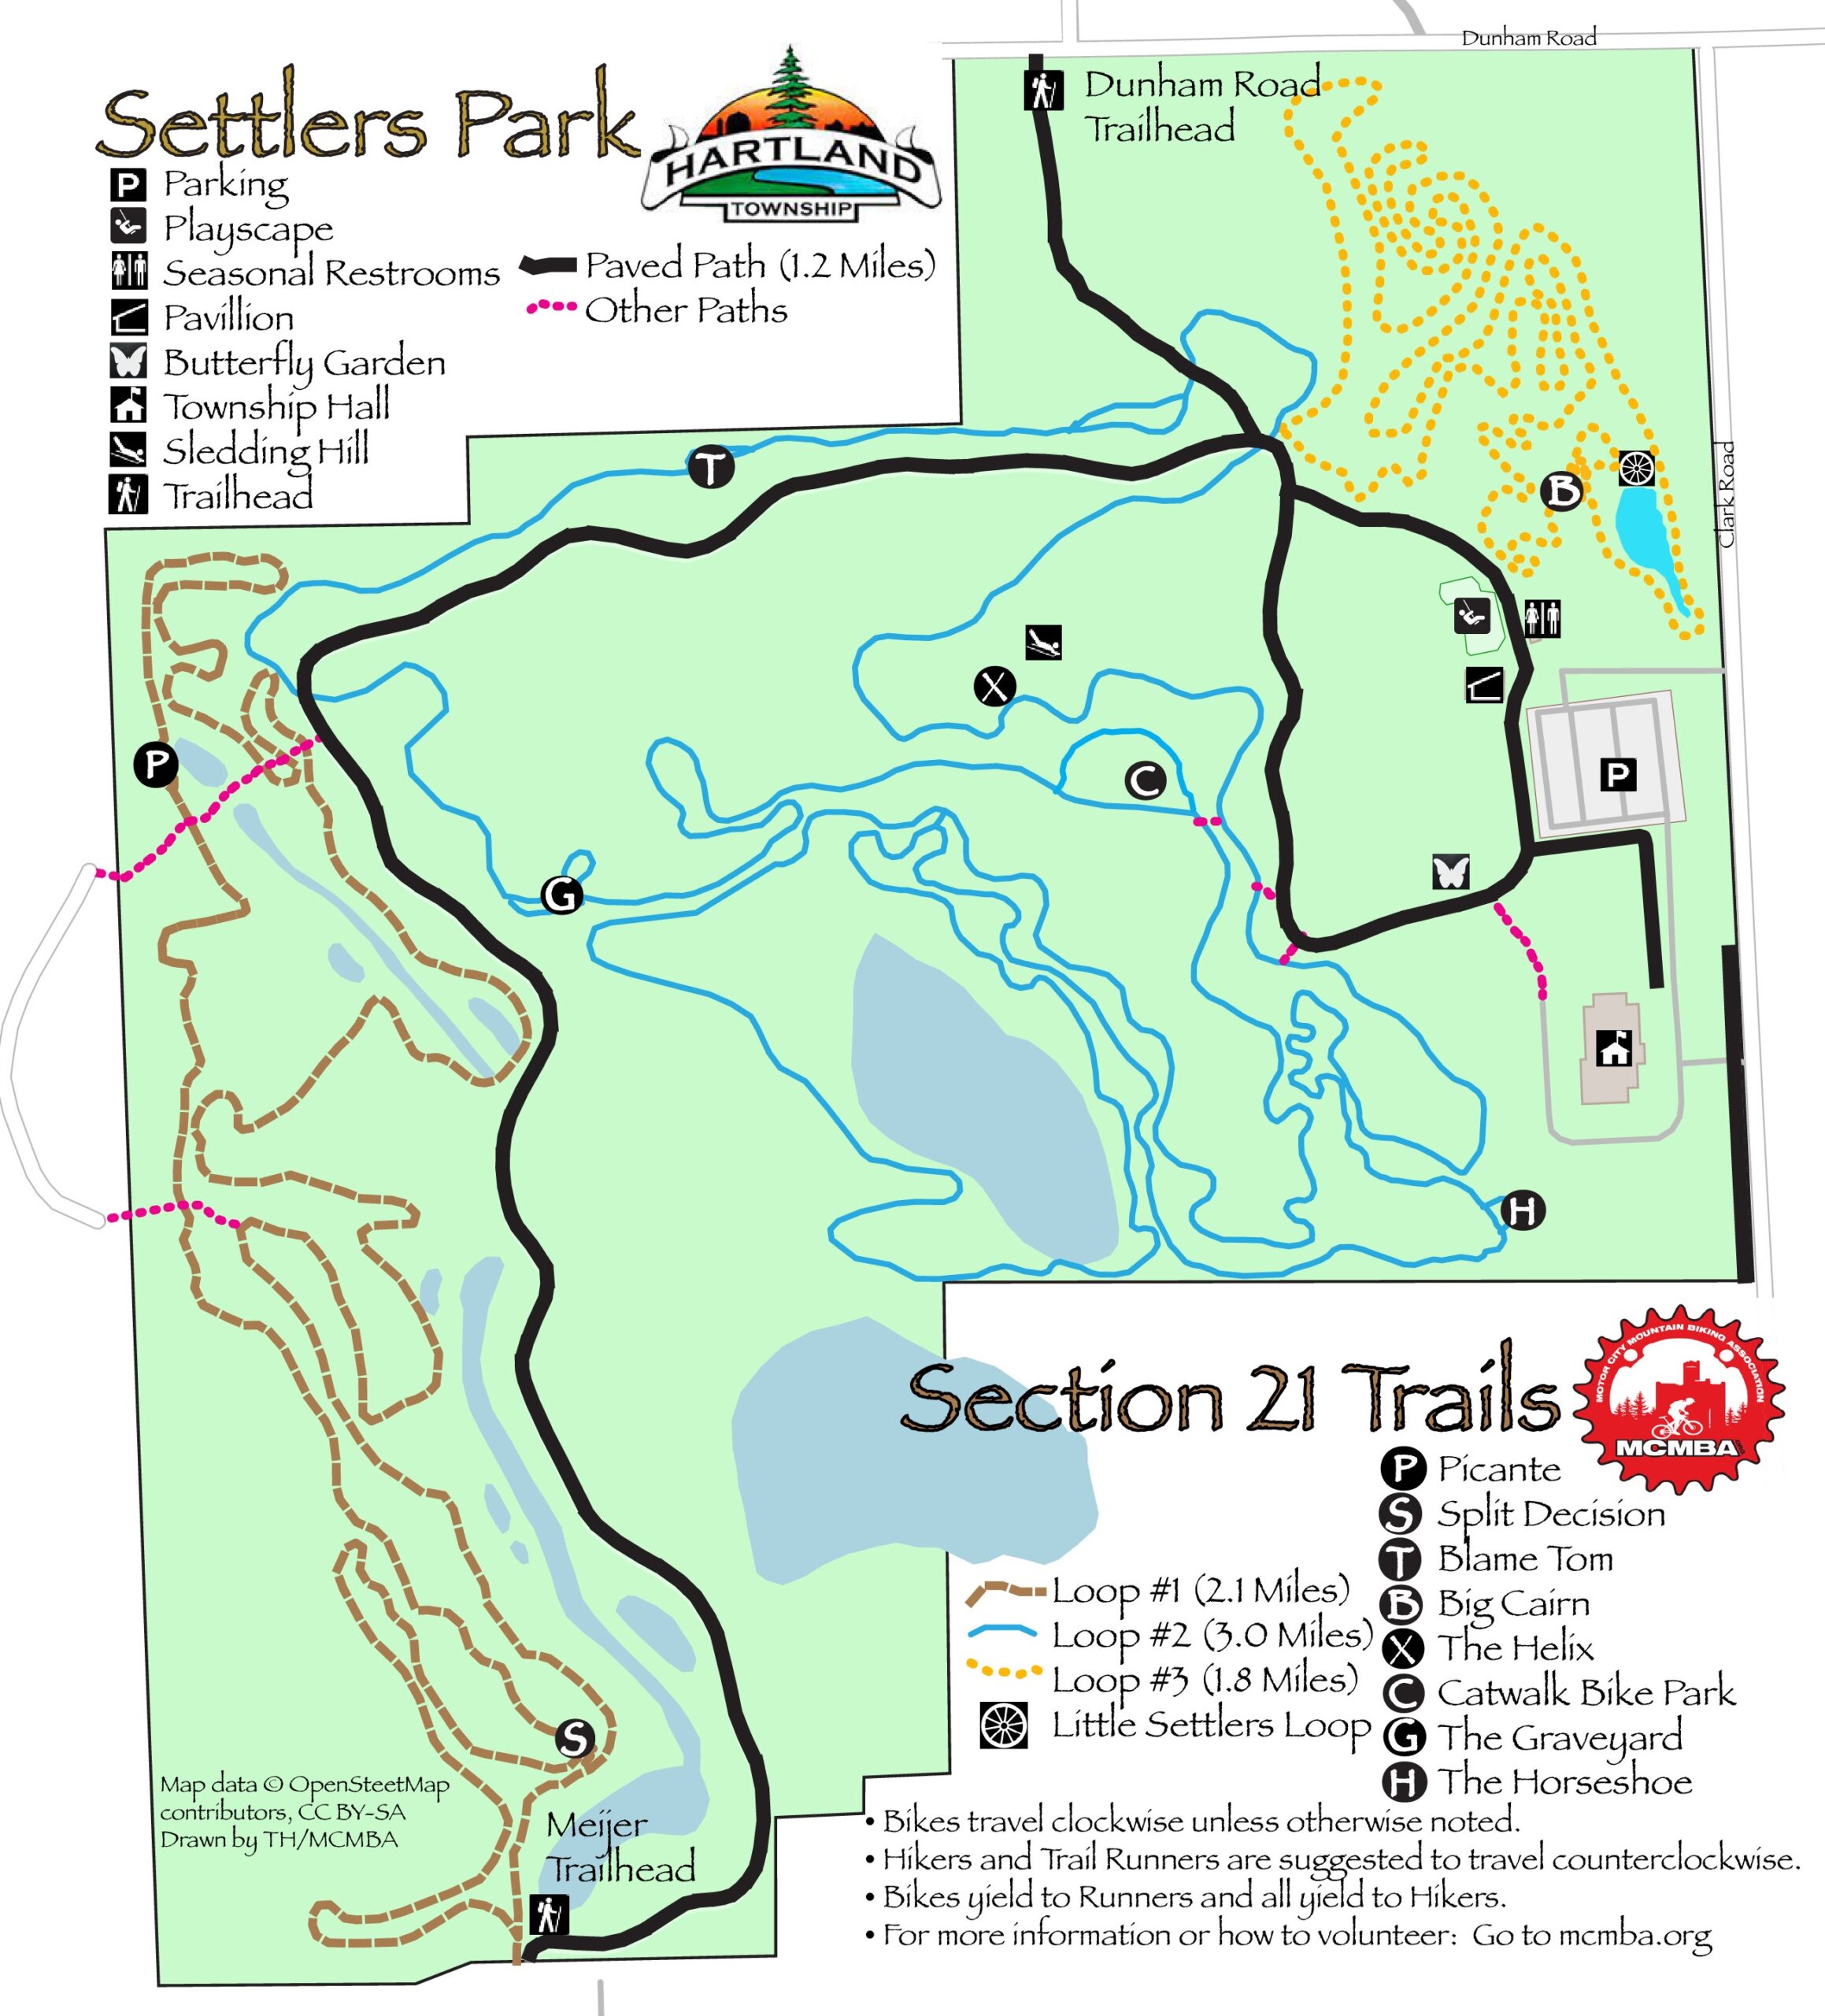 Section 21 Trails at Settlers Park